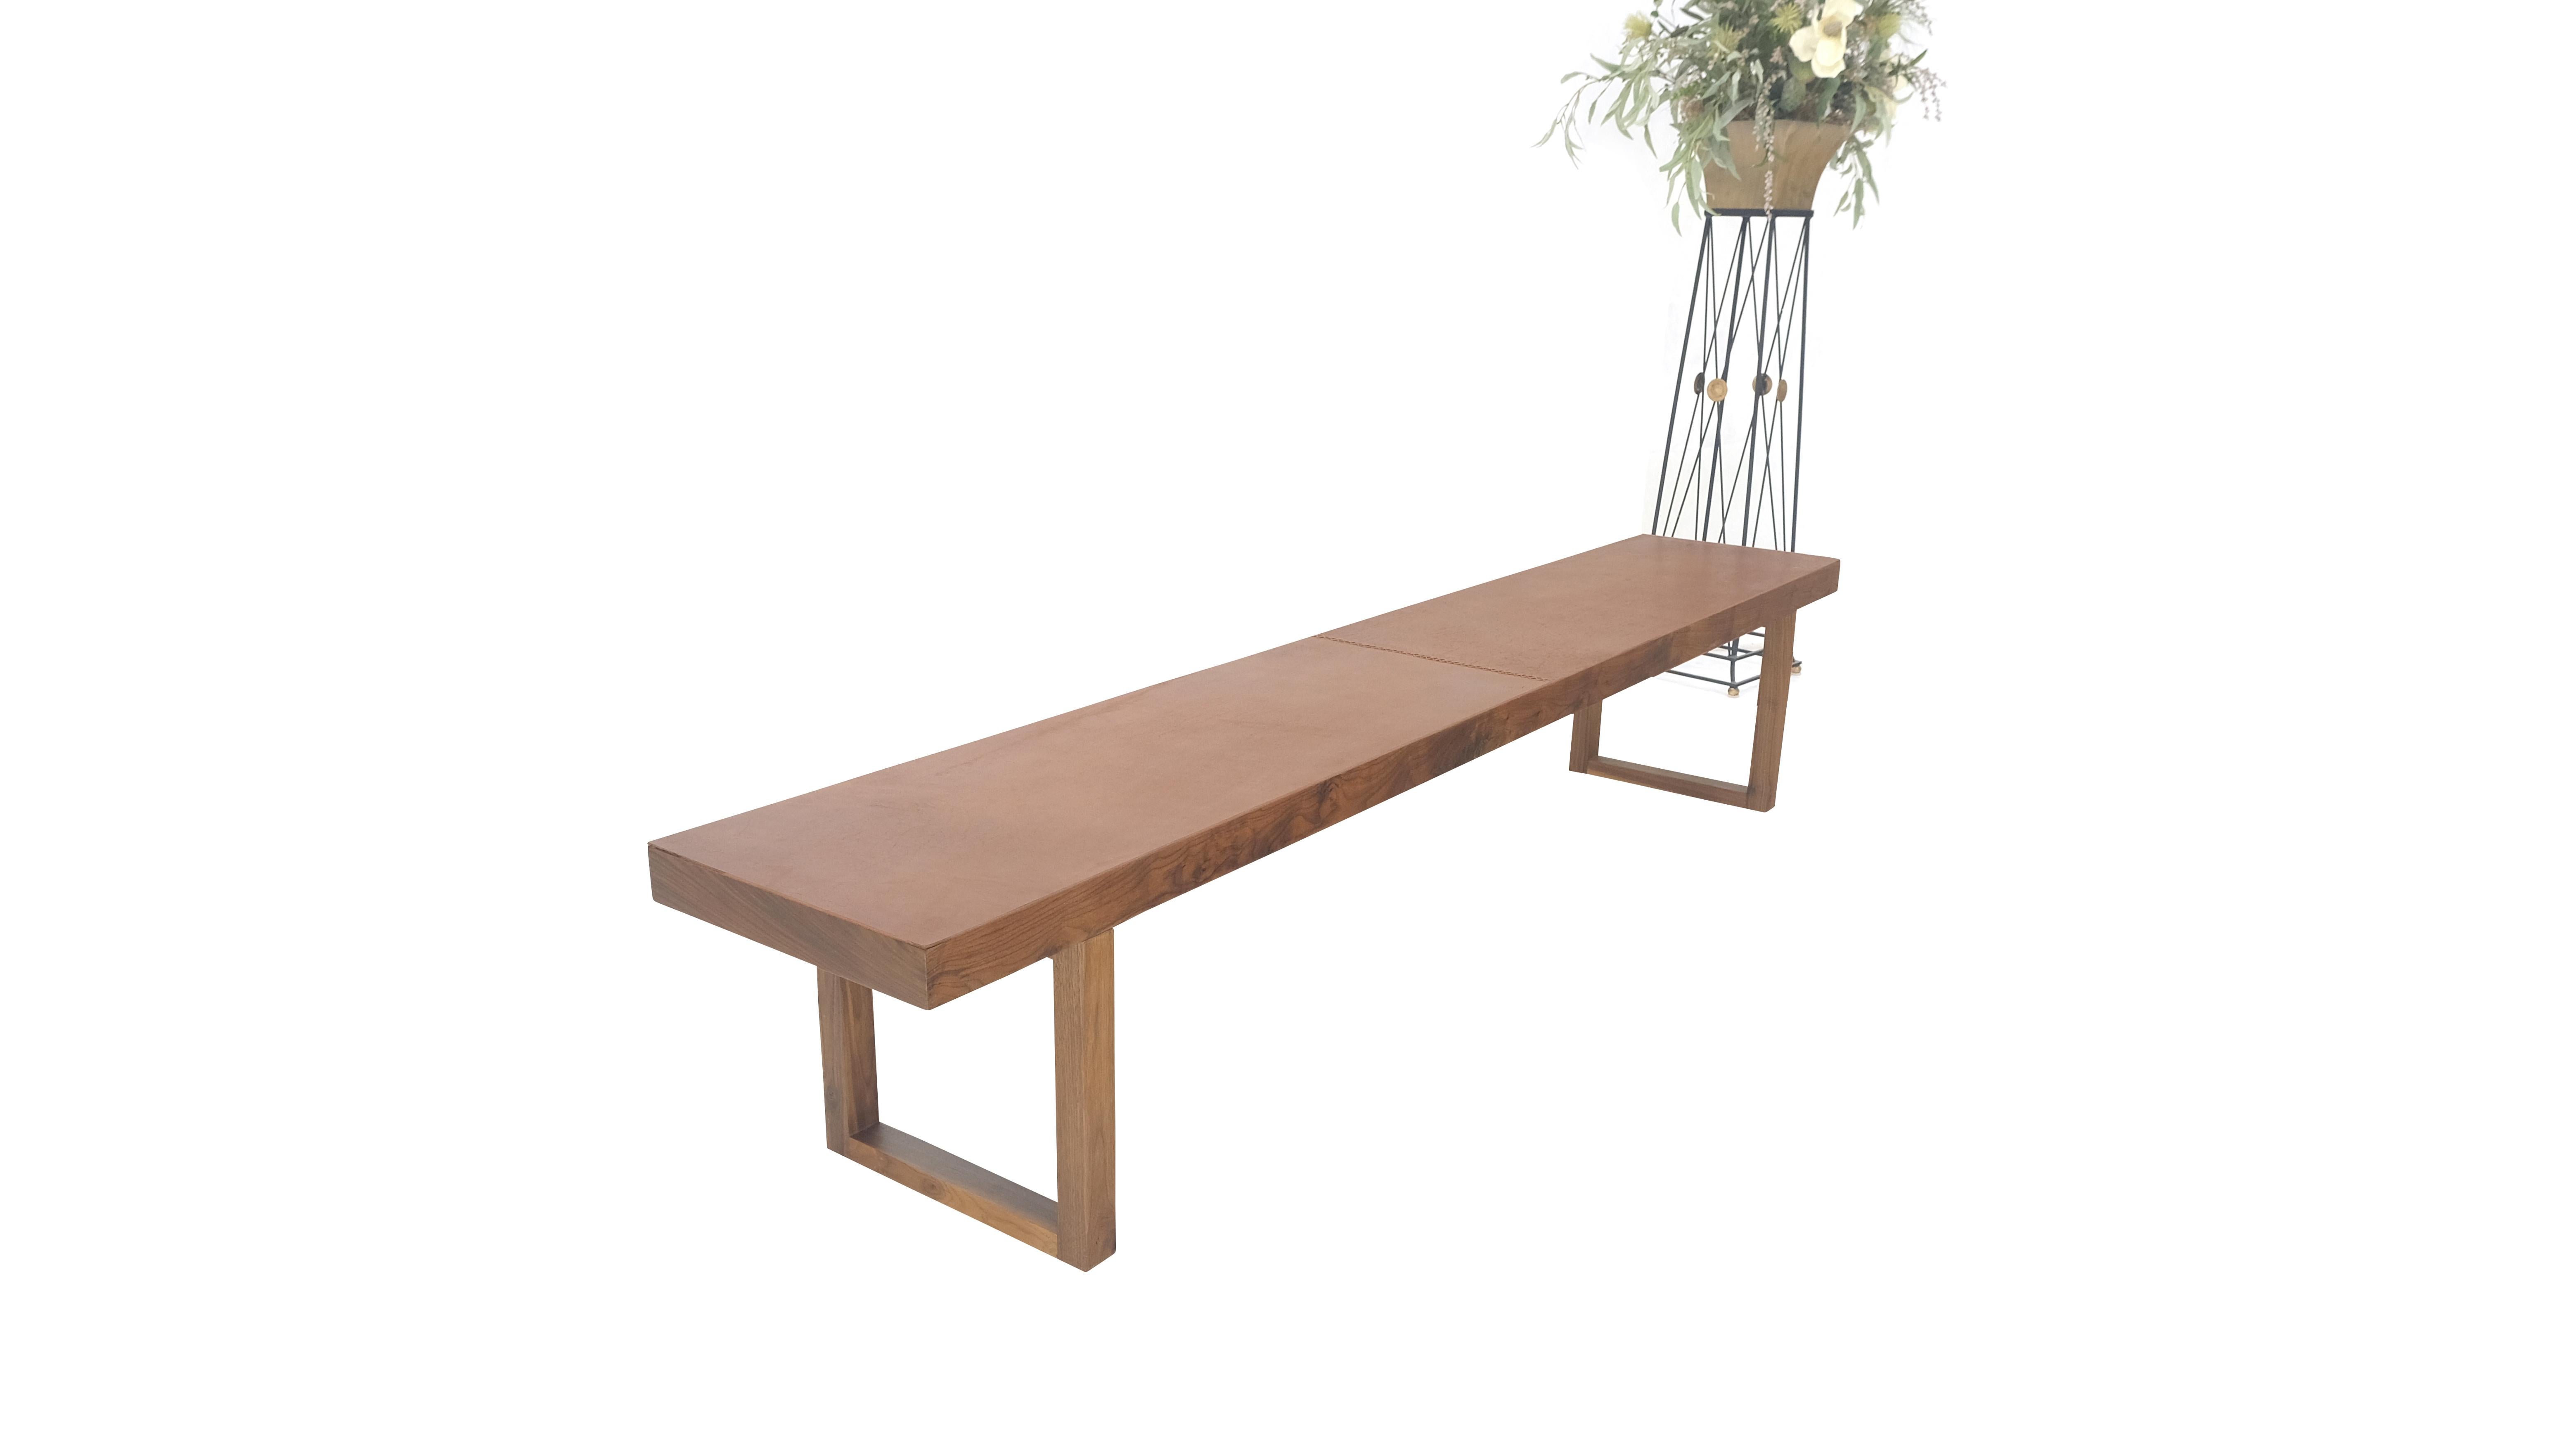 Slim Profile Solid Walnut Frame Integrated leather Cushion 7.5' Long Bench  3